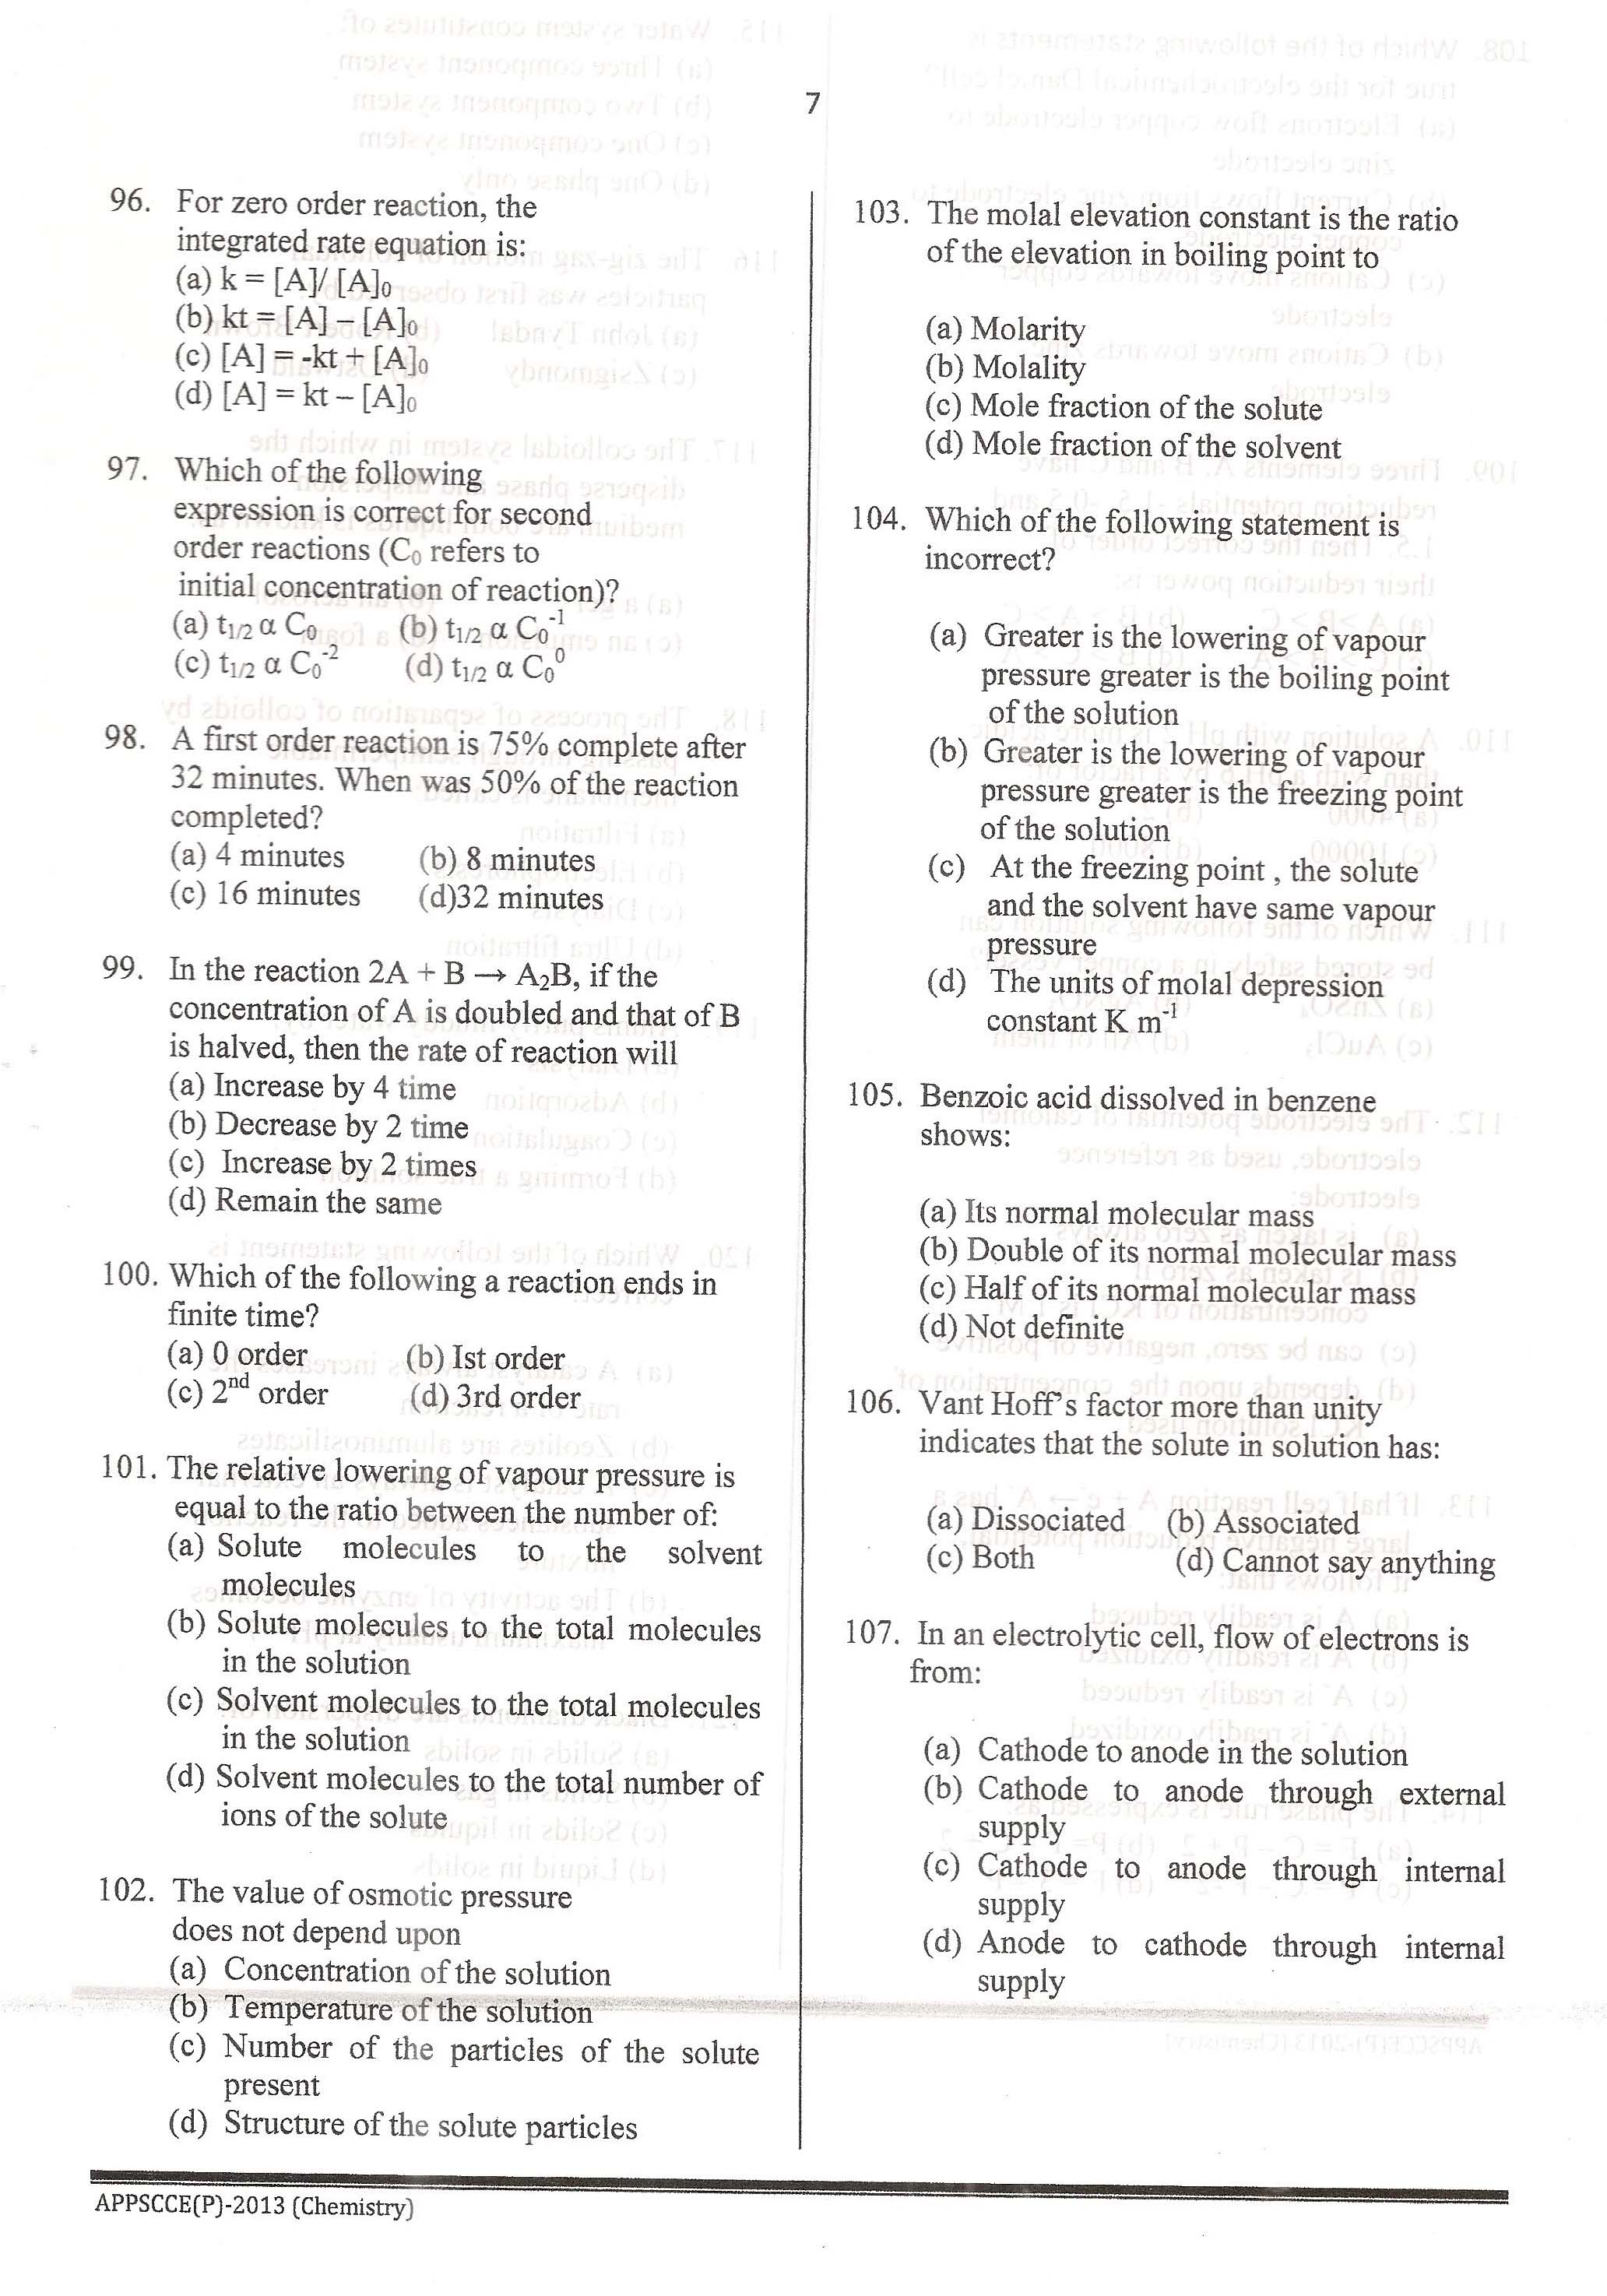 APPSC Combined Competitive Prelims Exam 2013 Chemistry 8